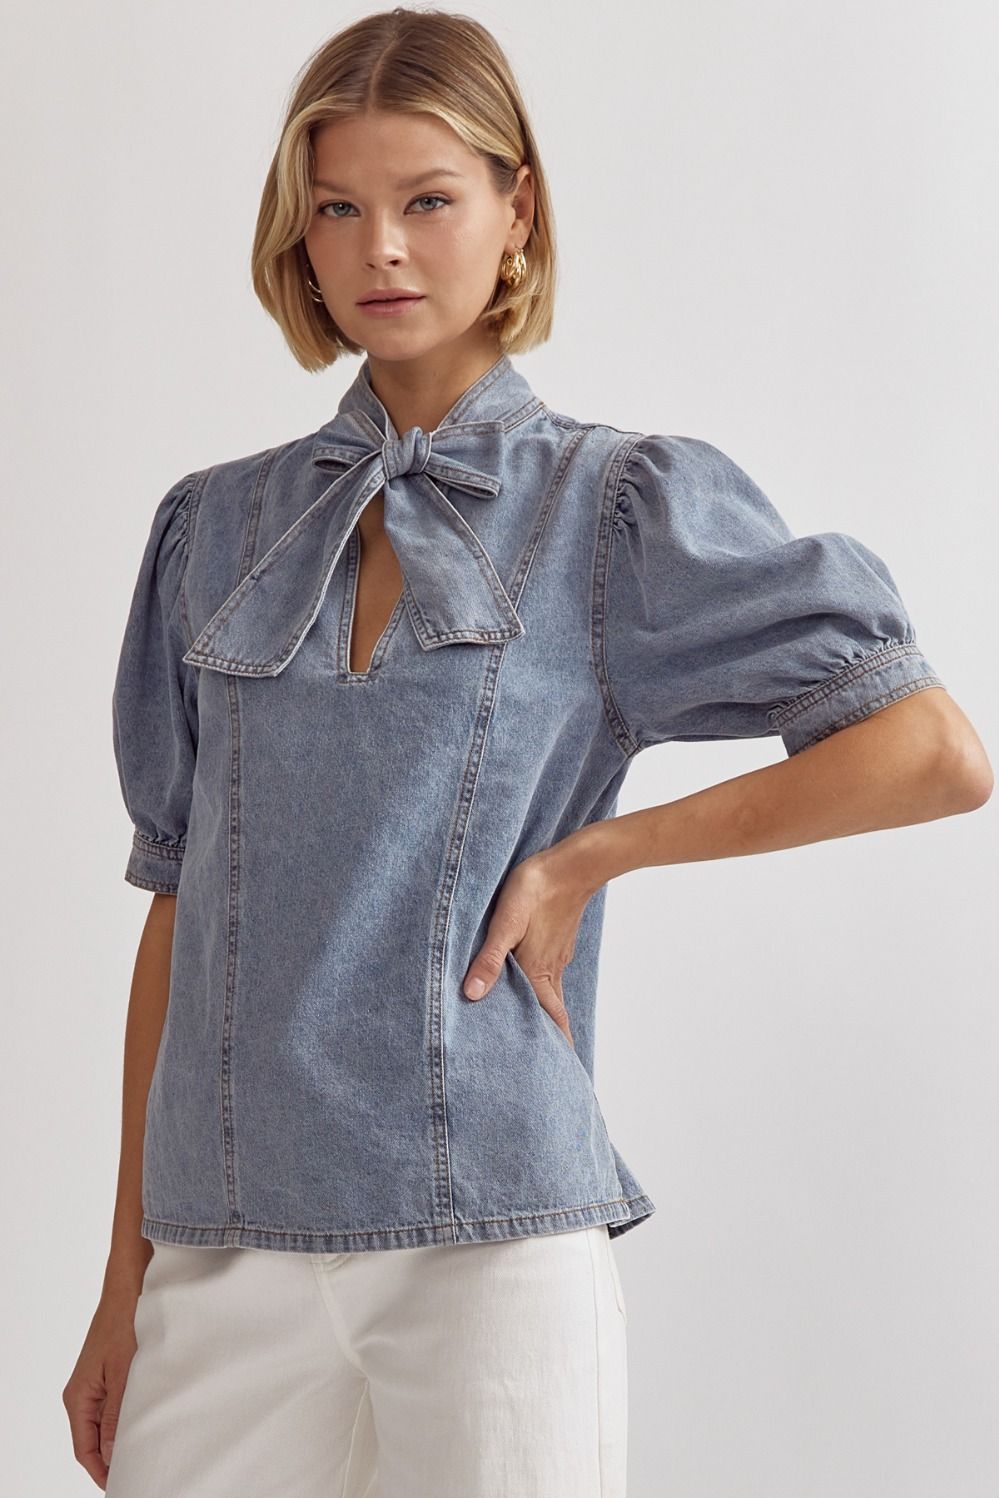 All Tied Up Denim Top